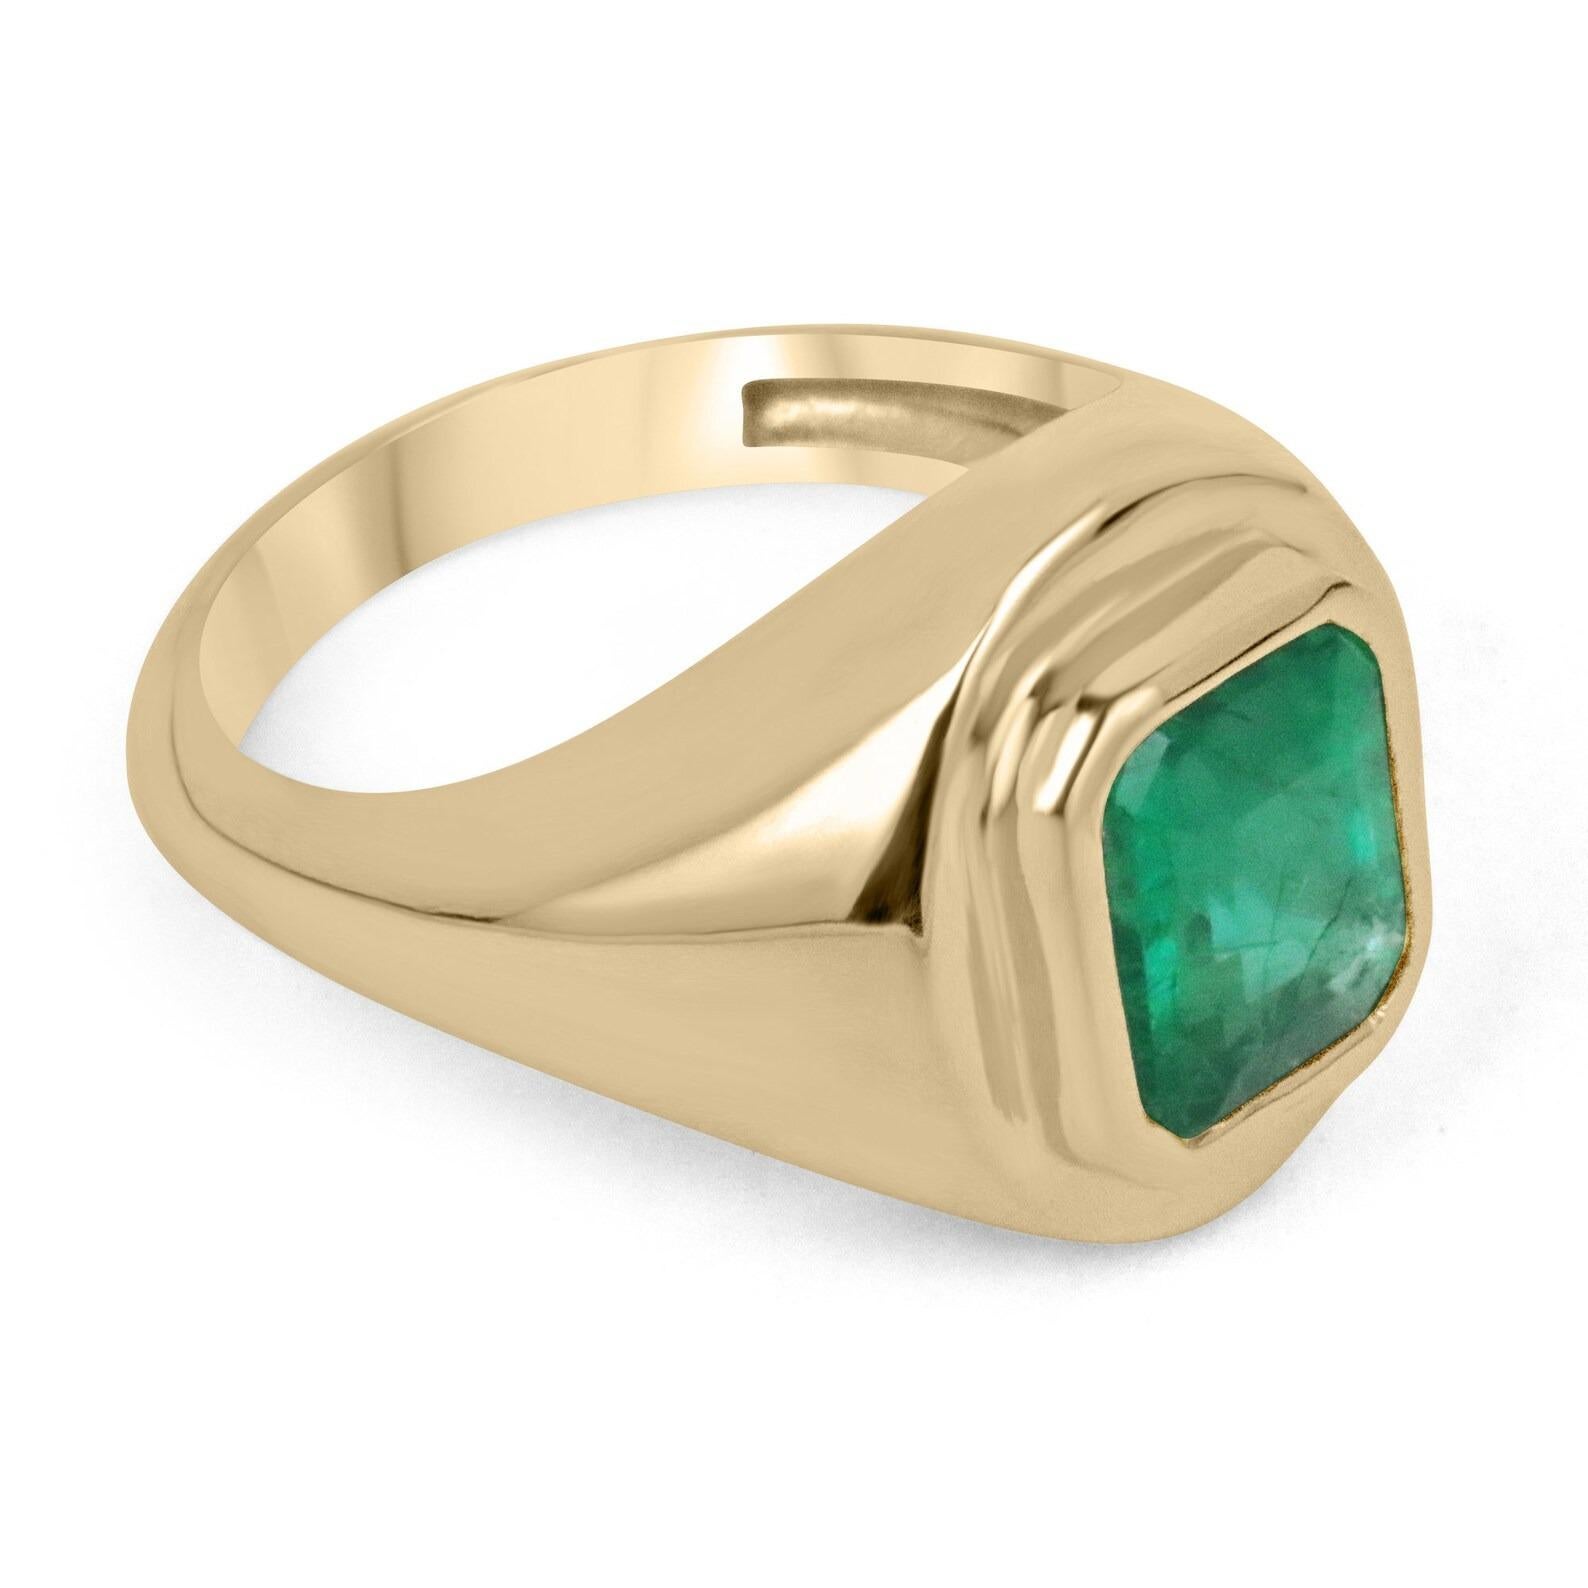 A luxurious solitaire emerald ring. The center stone features a magnificent 2.78-carat, natural emerald cut emerald ethically sourced from the mines of Zambia. This gemstone showcases a desirable rich, vivid, dark green color with a divine